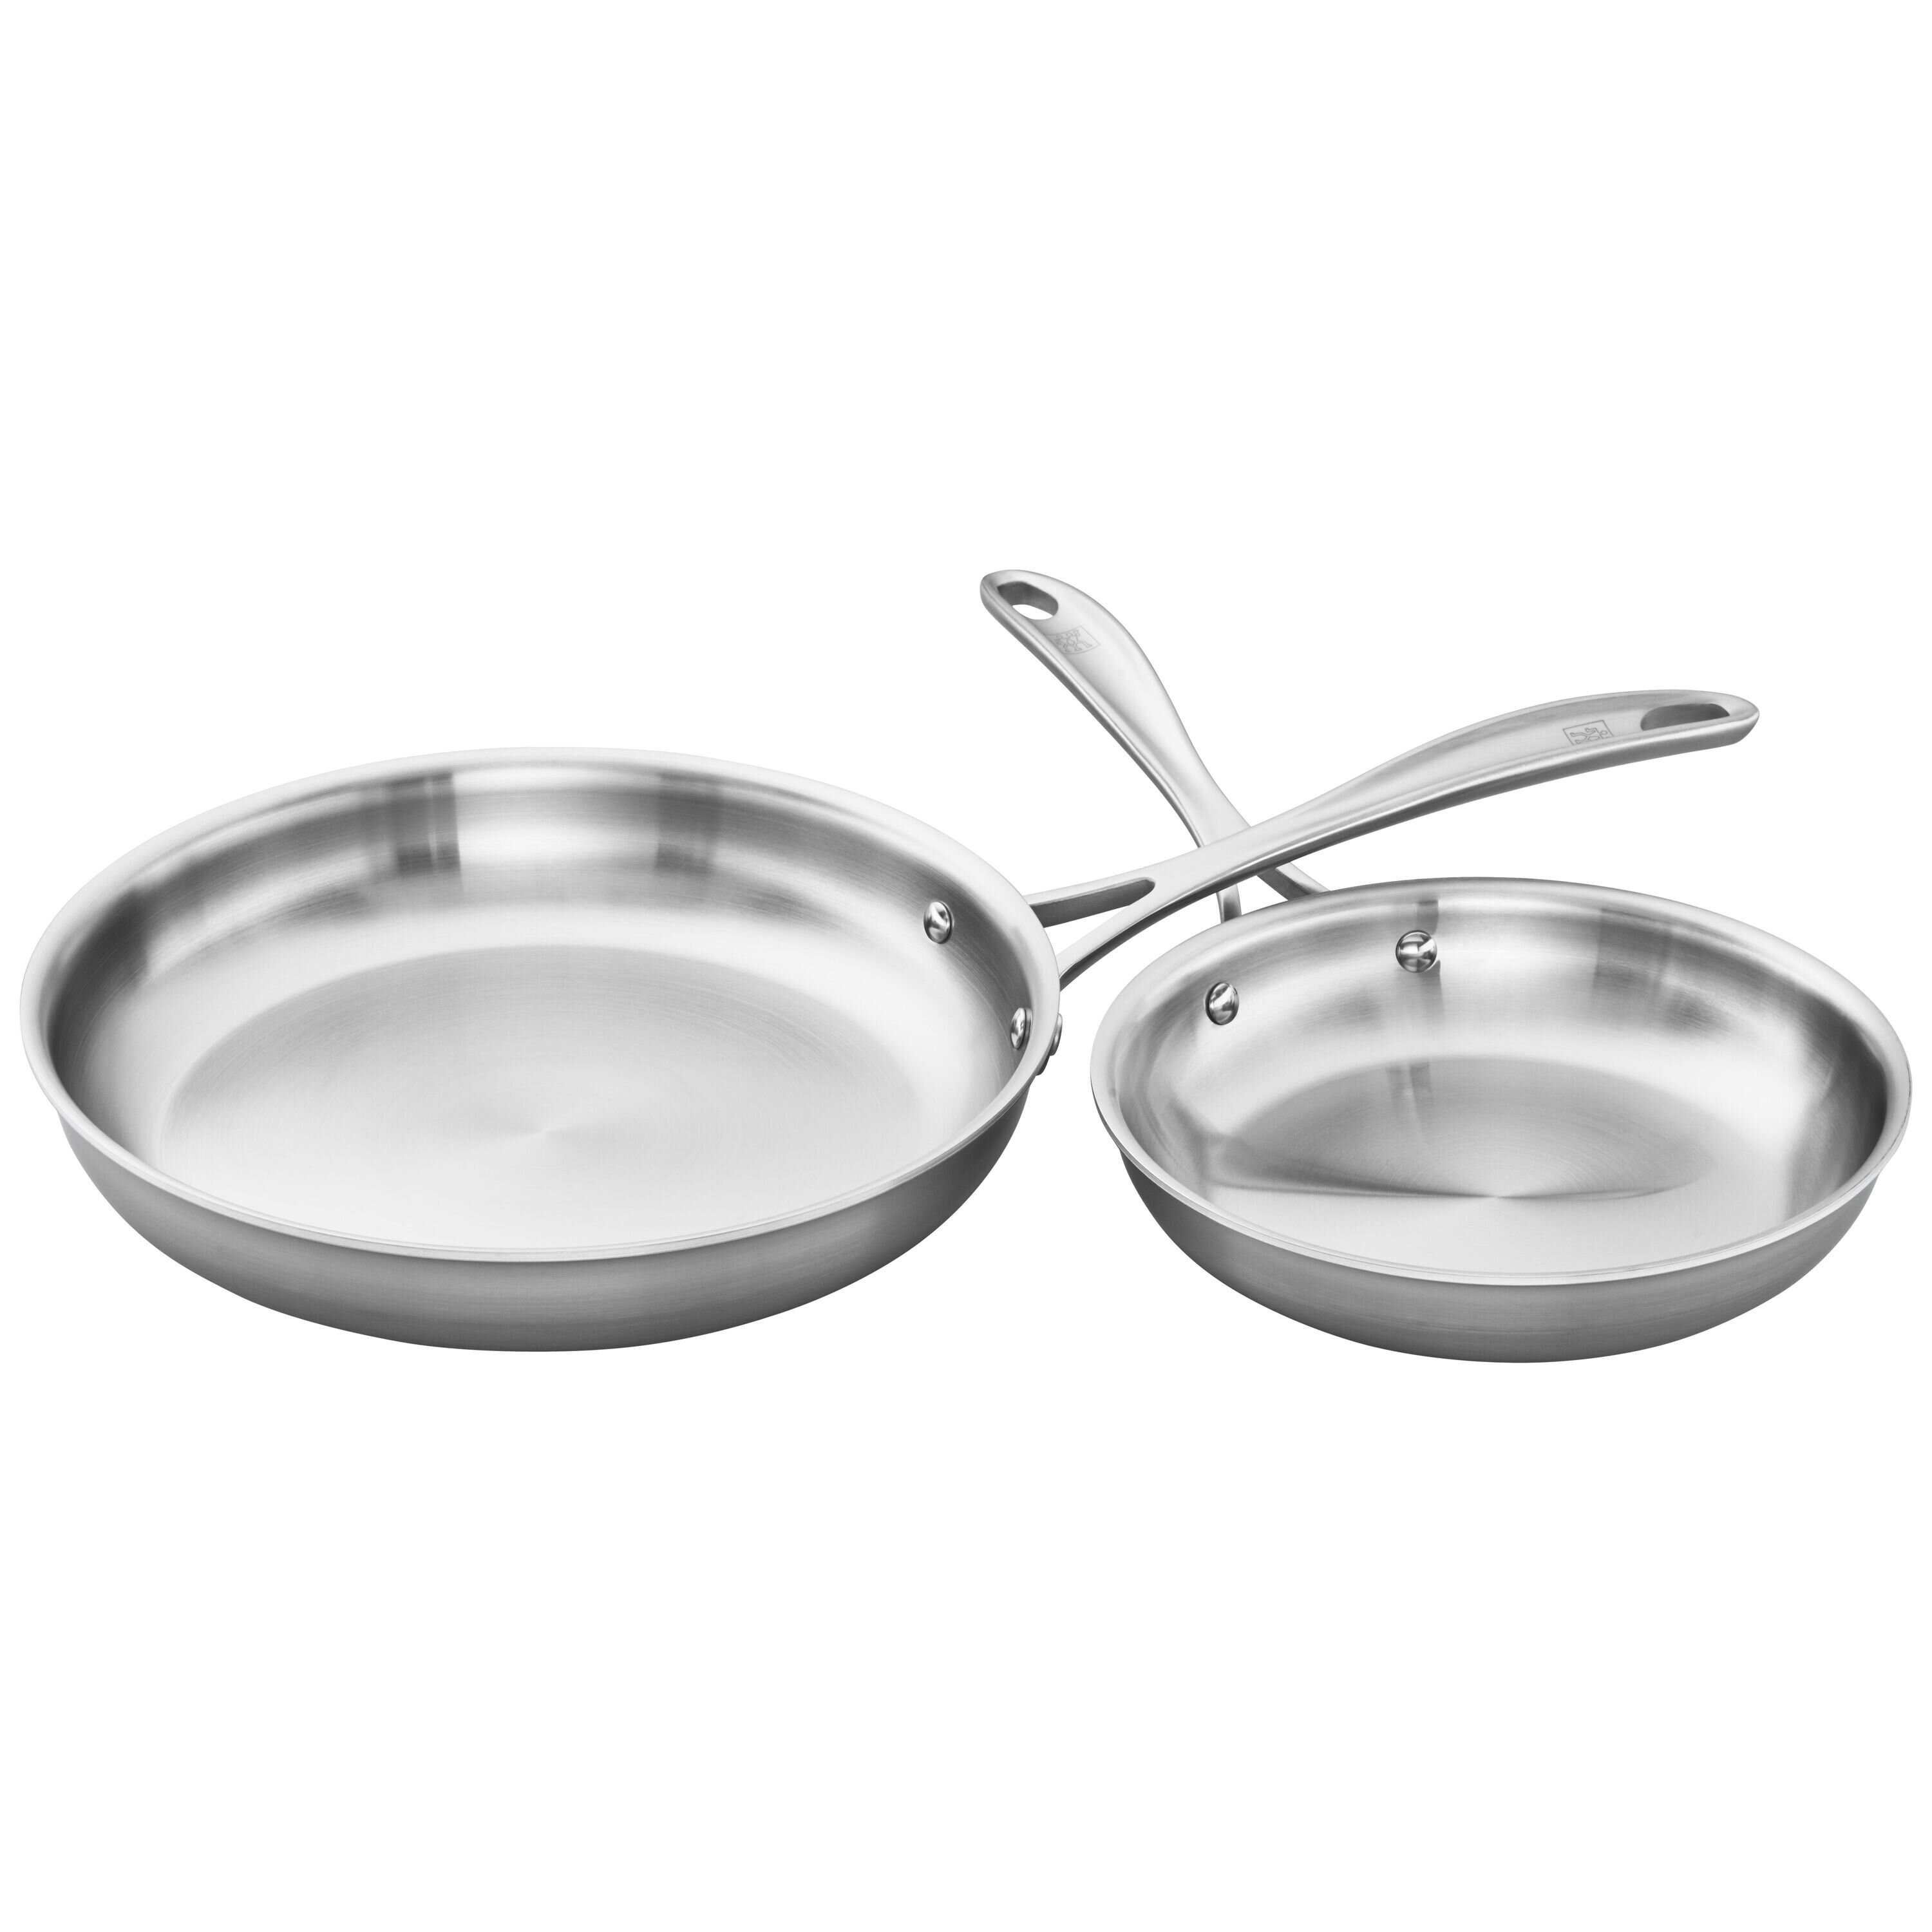 Cuisinart Multiclad Triple Ply Stainless Steel Frying Pans - Cutler's